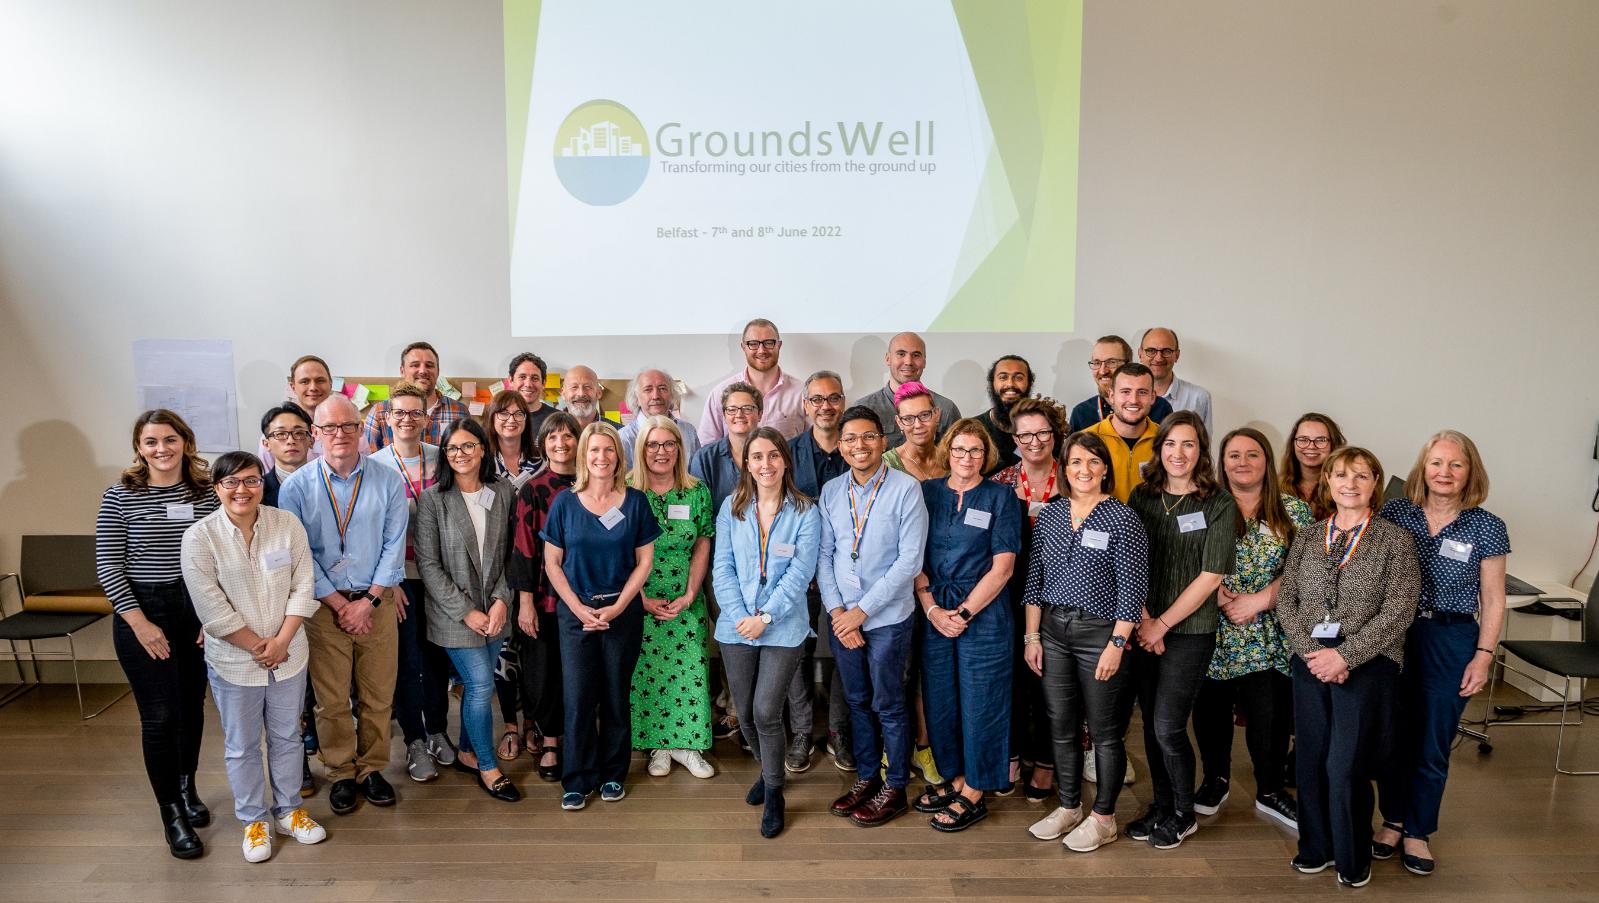 Group photo of some of the GroundsWell team